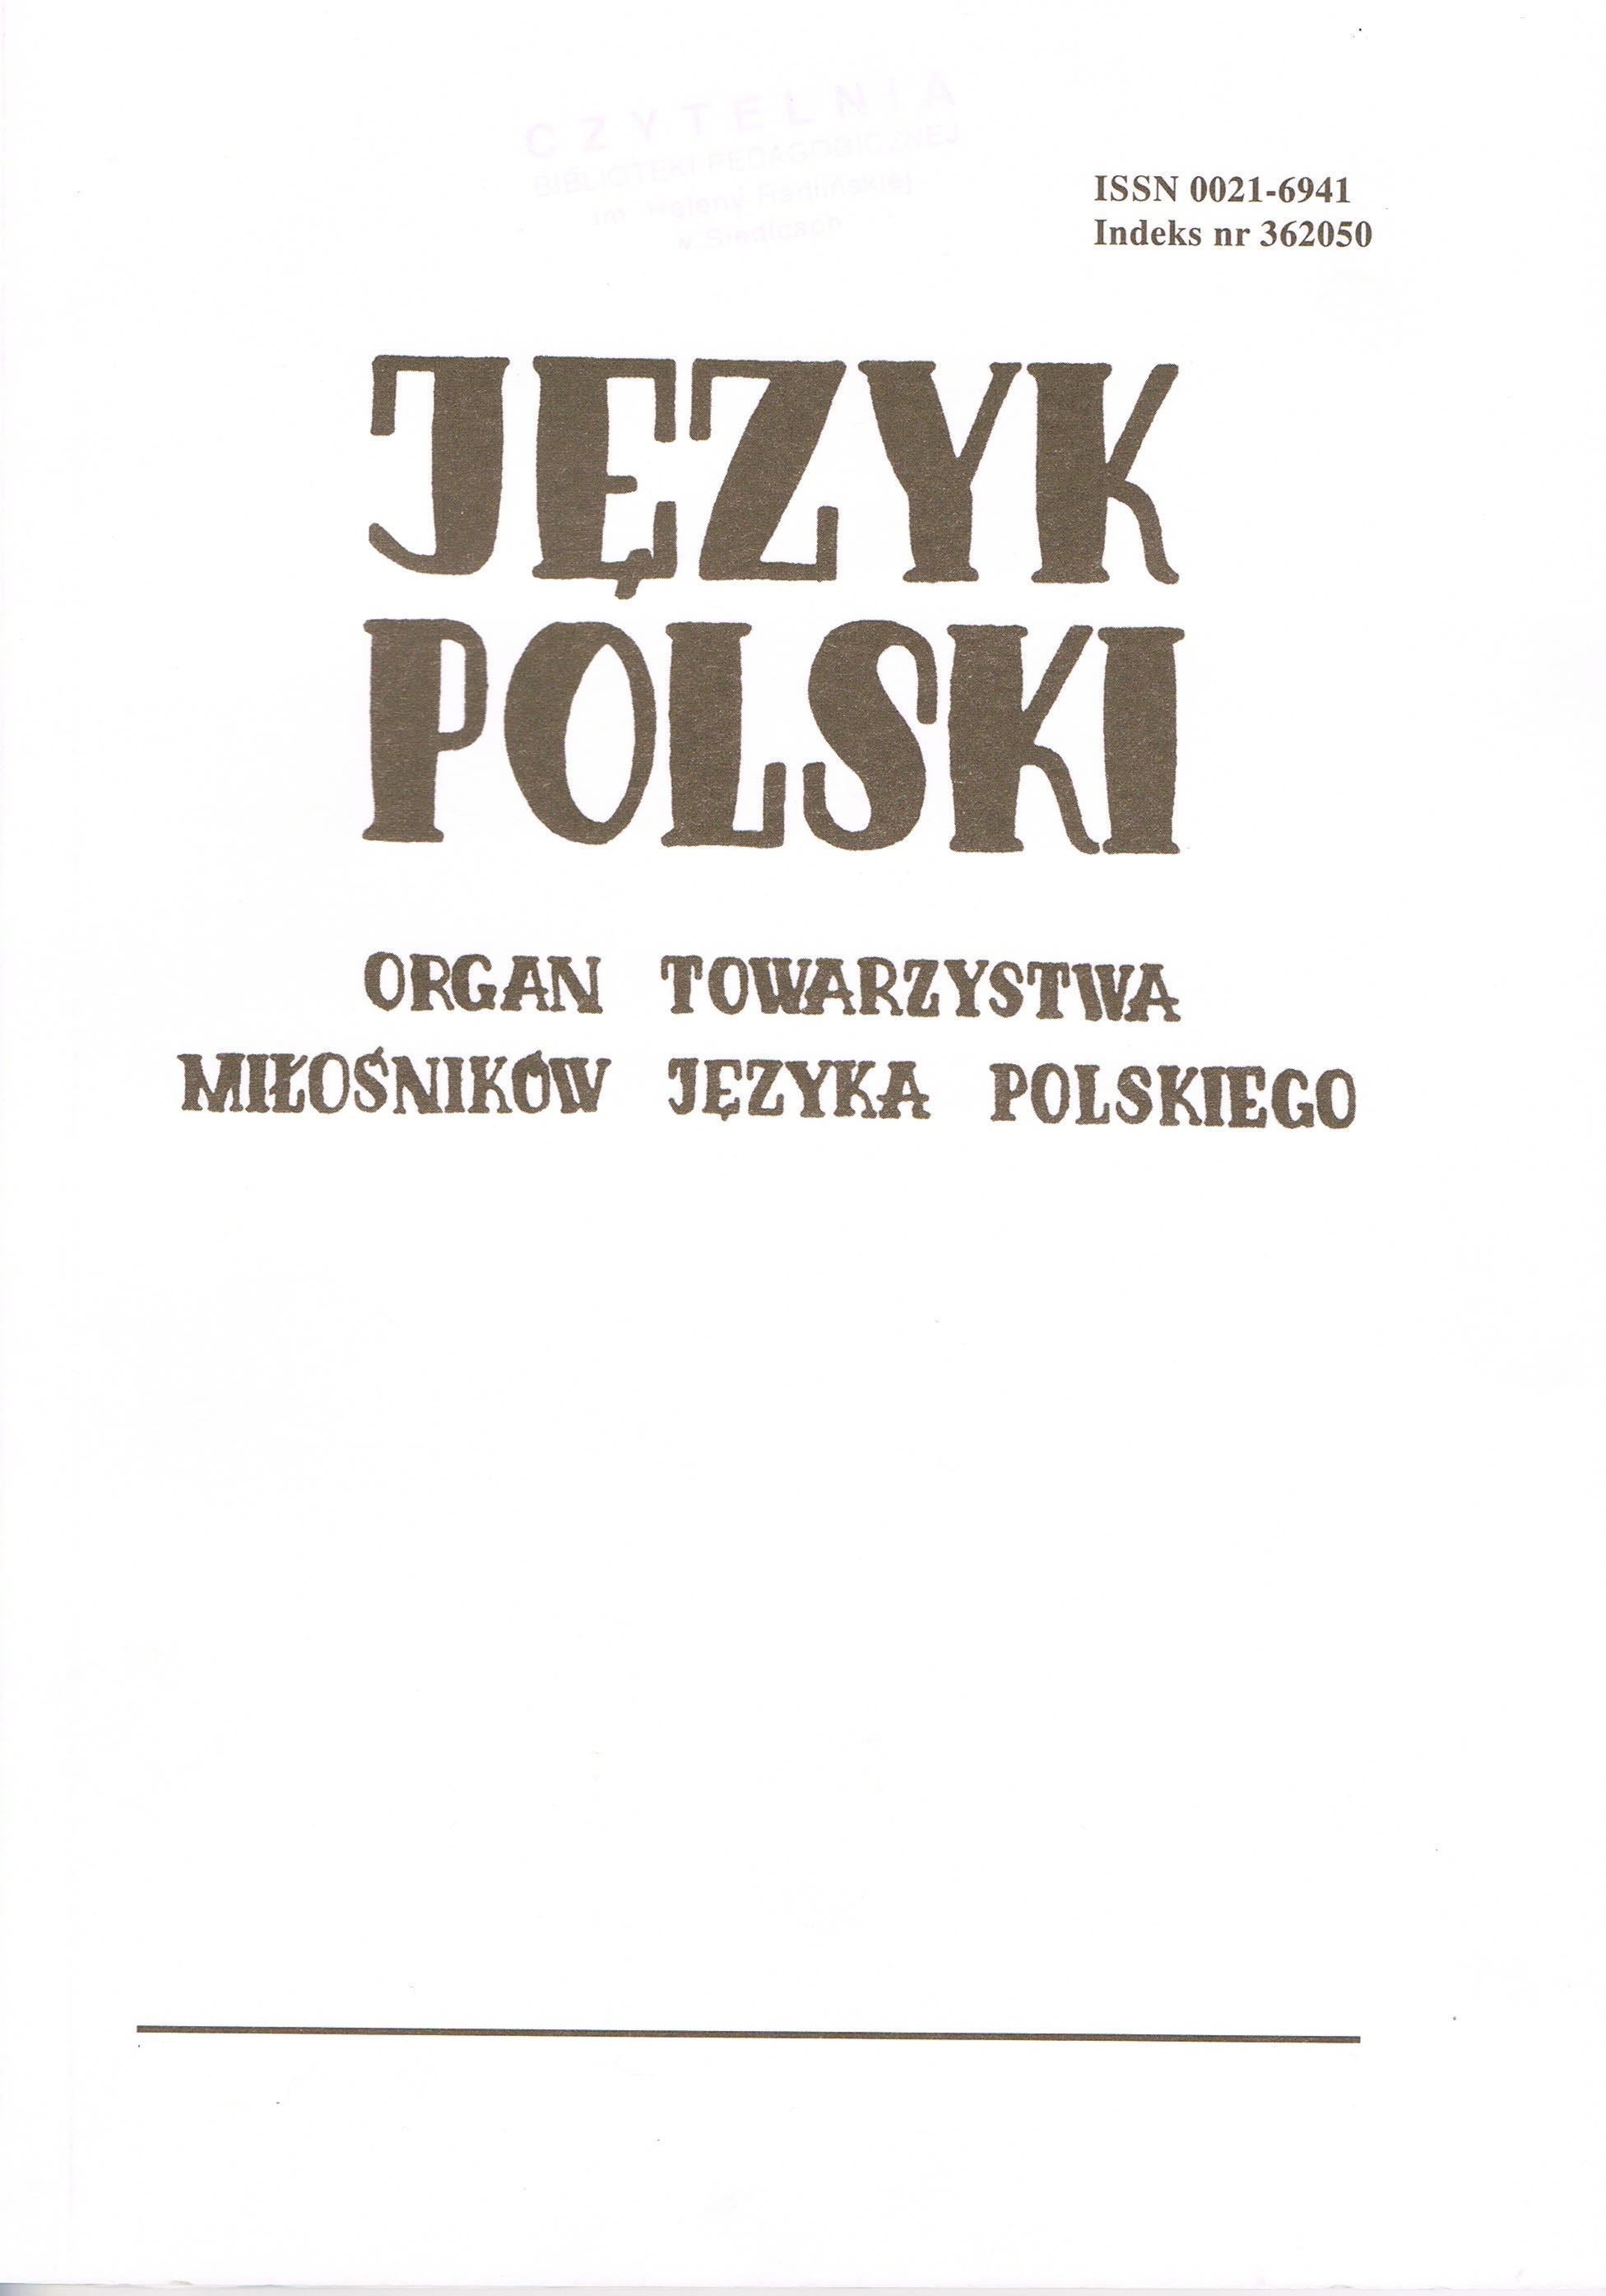 Linguistics in Polish studies in the 21st century – jubilee questionnaire of "Język Polski" Cover Image